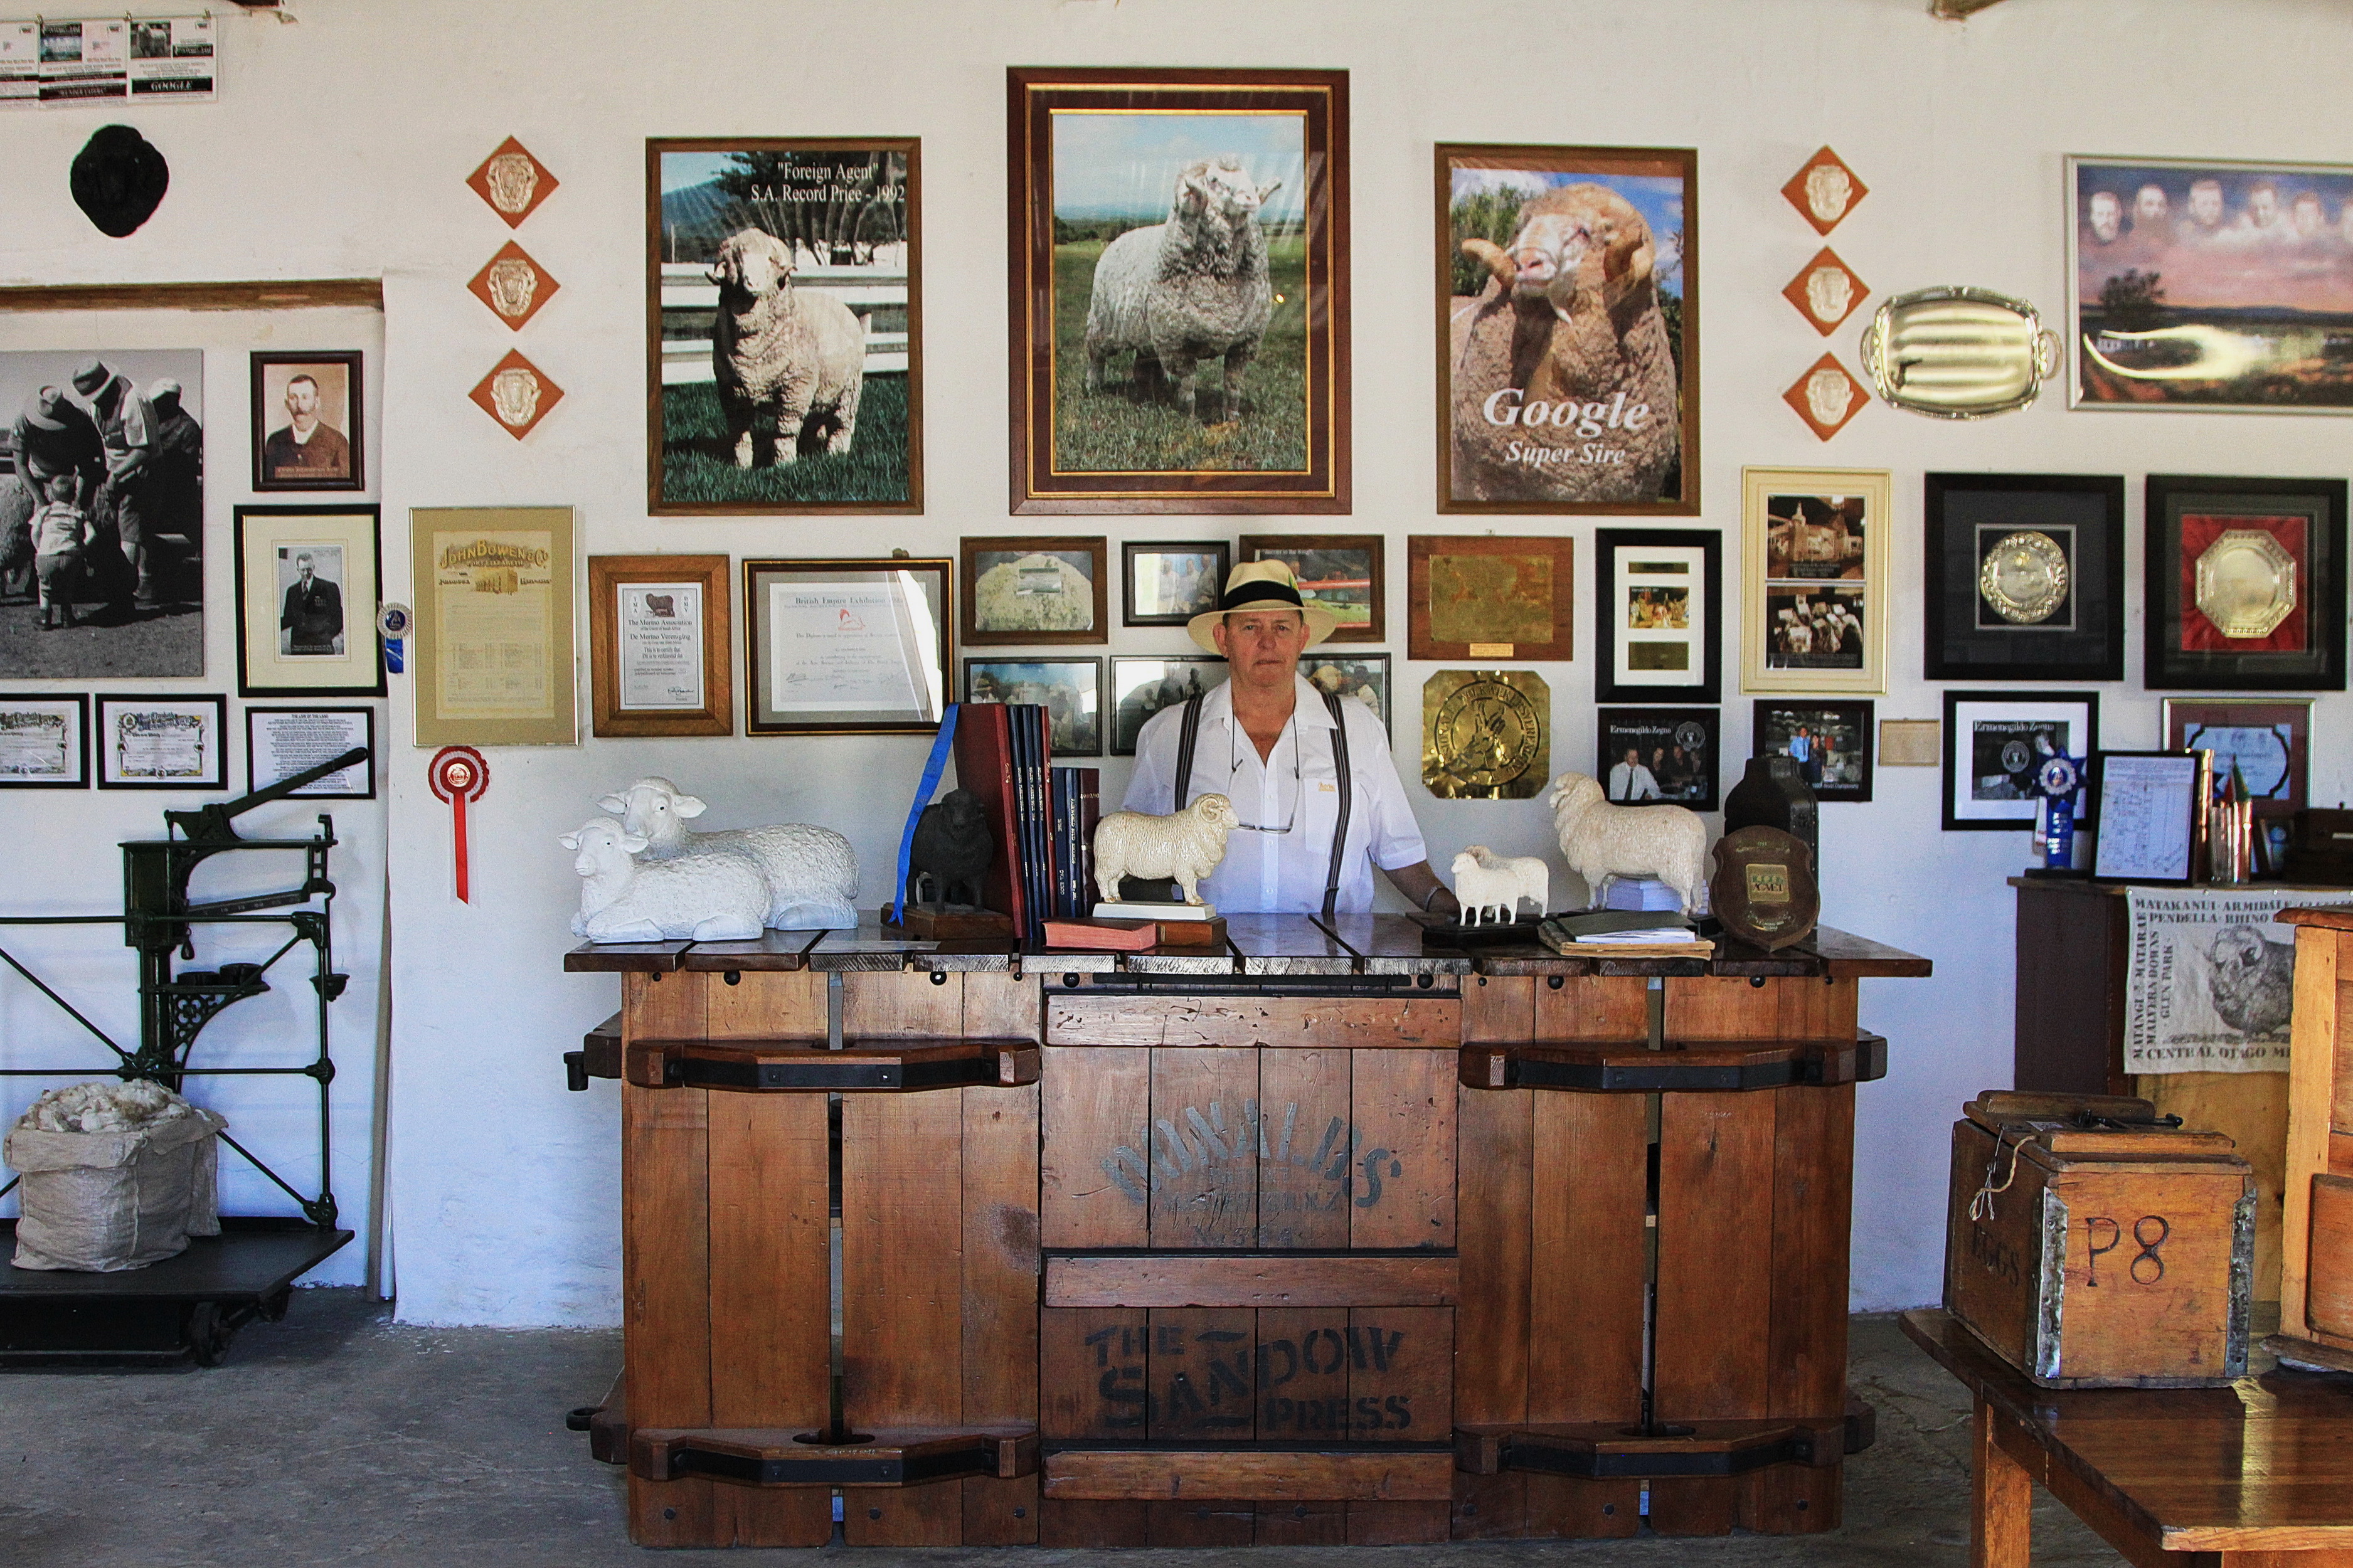 Flocking to a sheep museum in the Karoo 